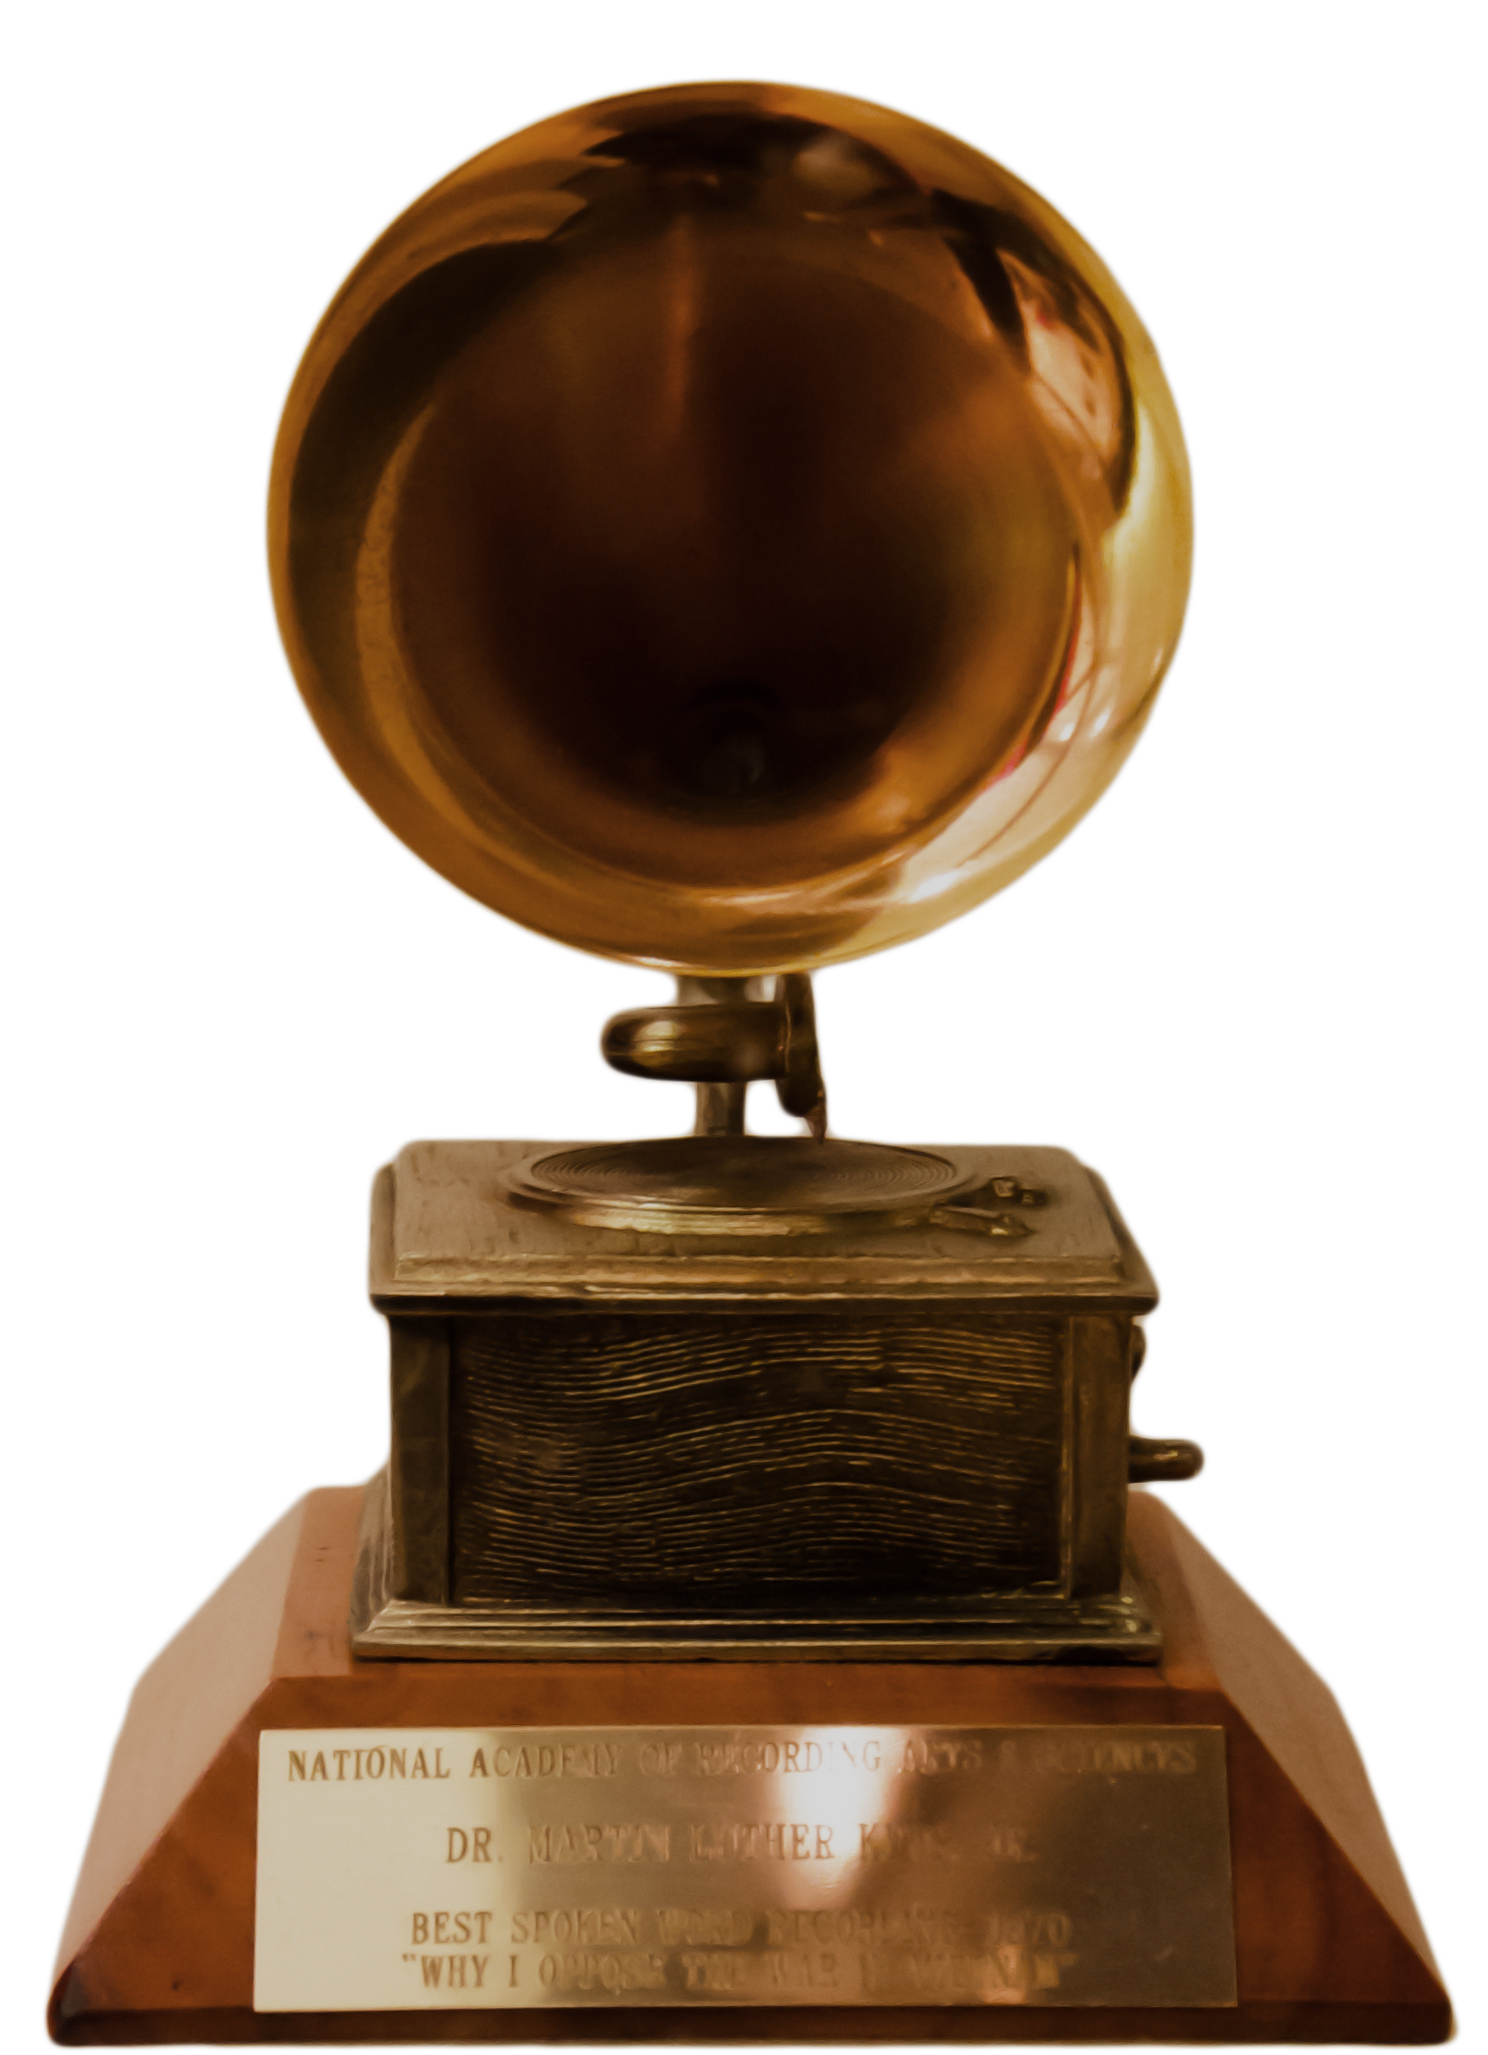 http://upload.wikimedia.org/wikipedia/commons/a/af/Grammy_Award_of_Dr._Martin_Luther_King,_Jr..jpg